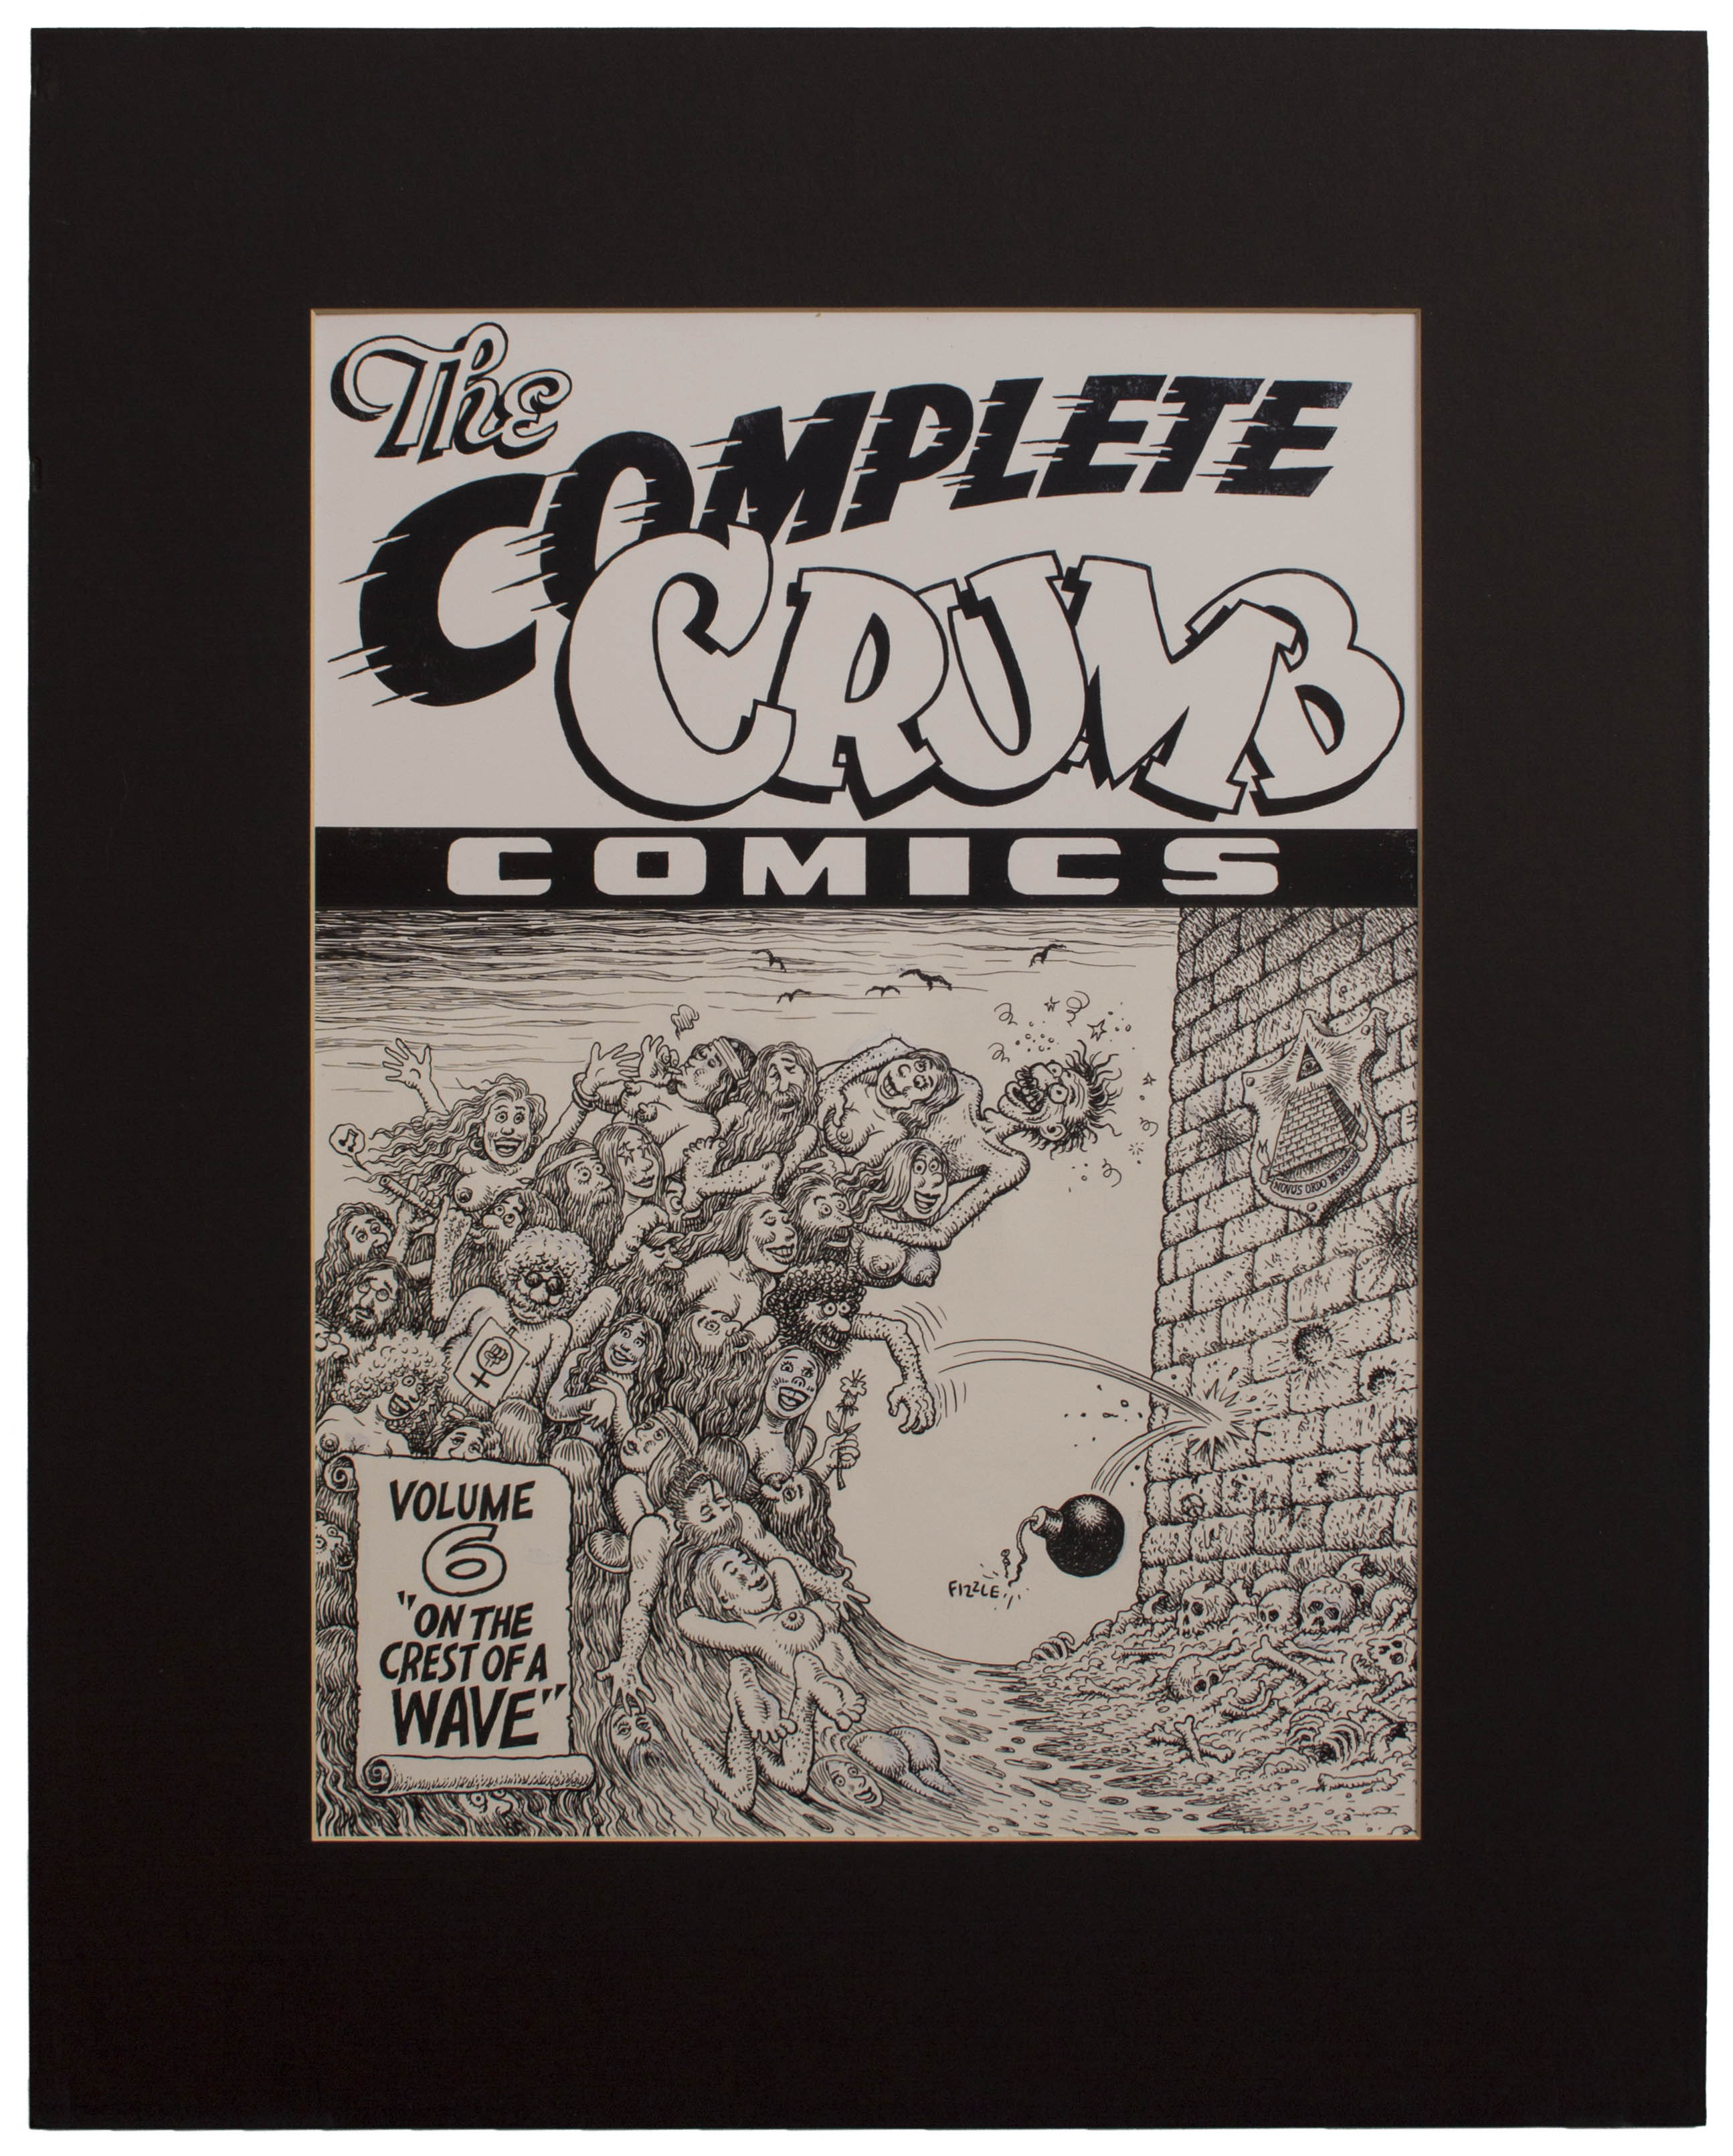 Auction Your Robert Crumb Comic Art For $750,000+ at Nate D. Sanders